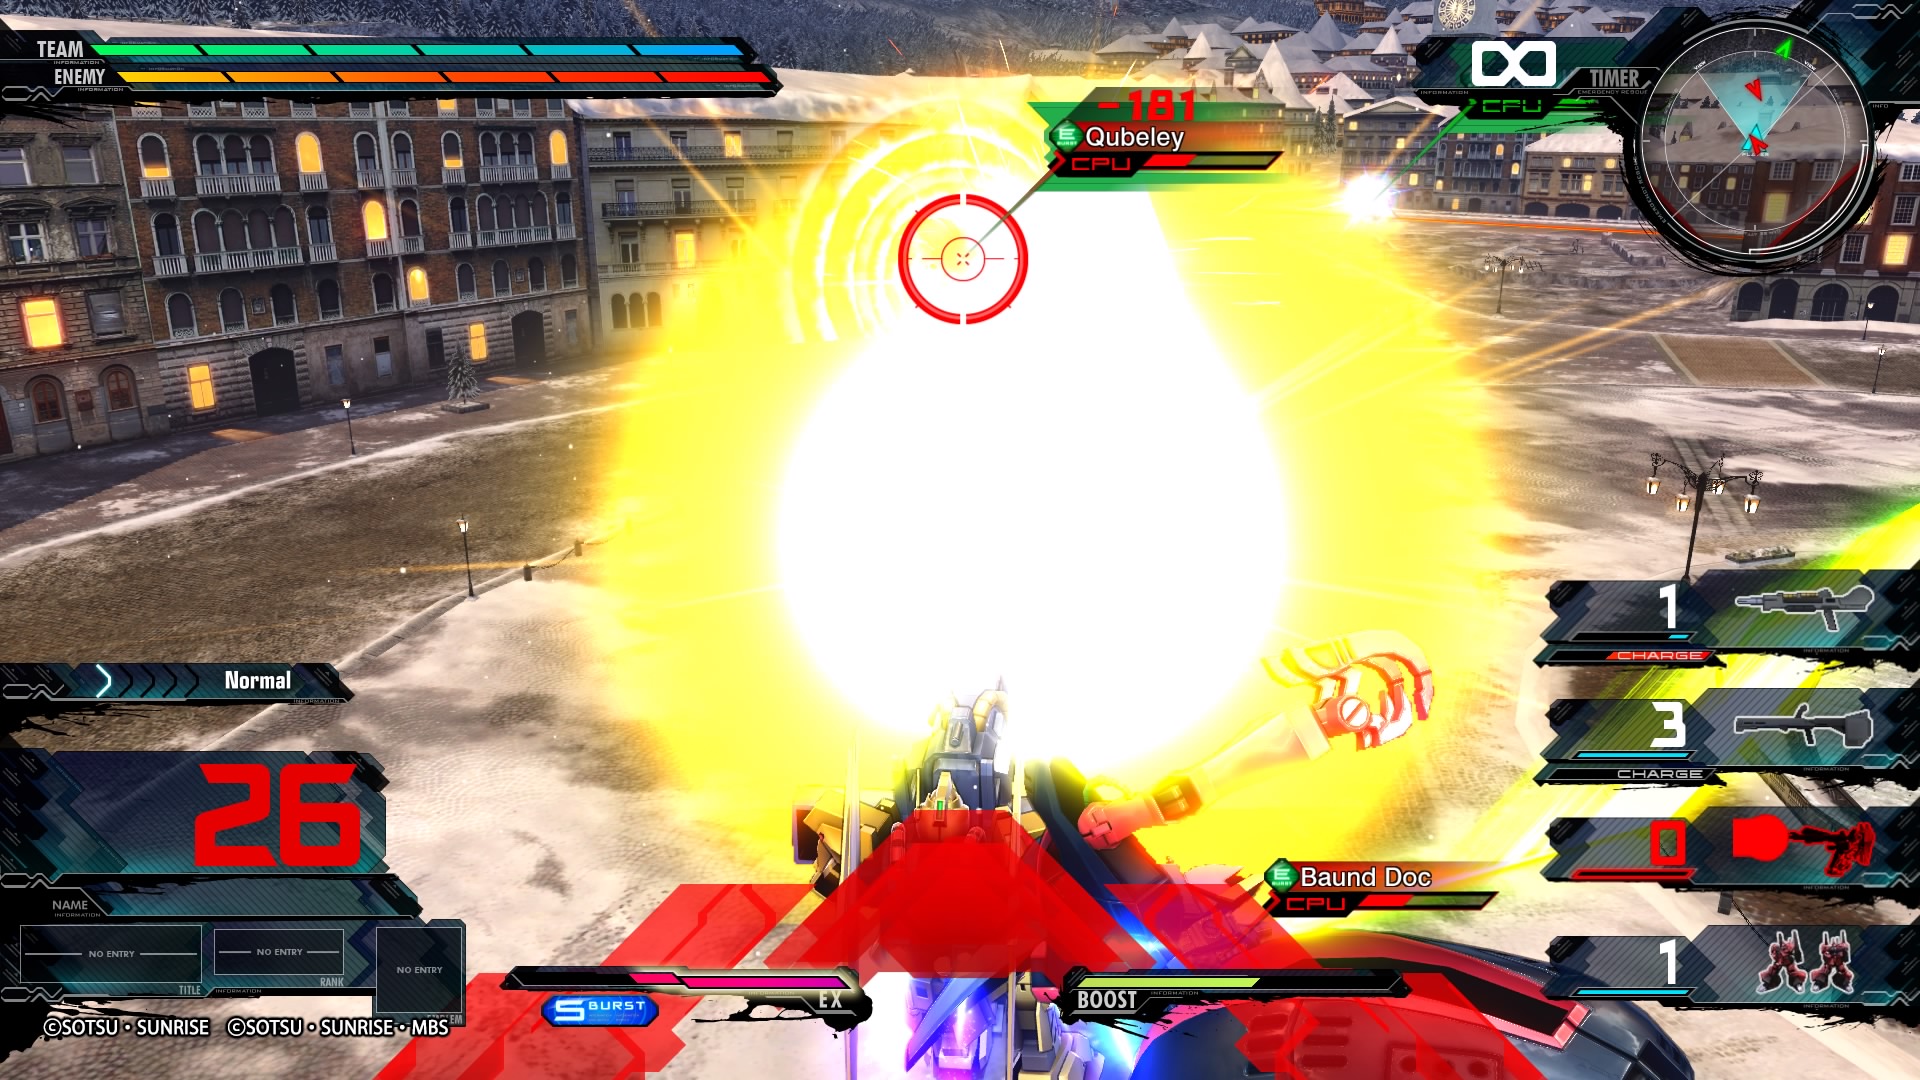 Mobile Suit Gundam Extreme Vs. Maxiboost ON Review